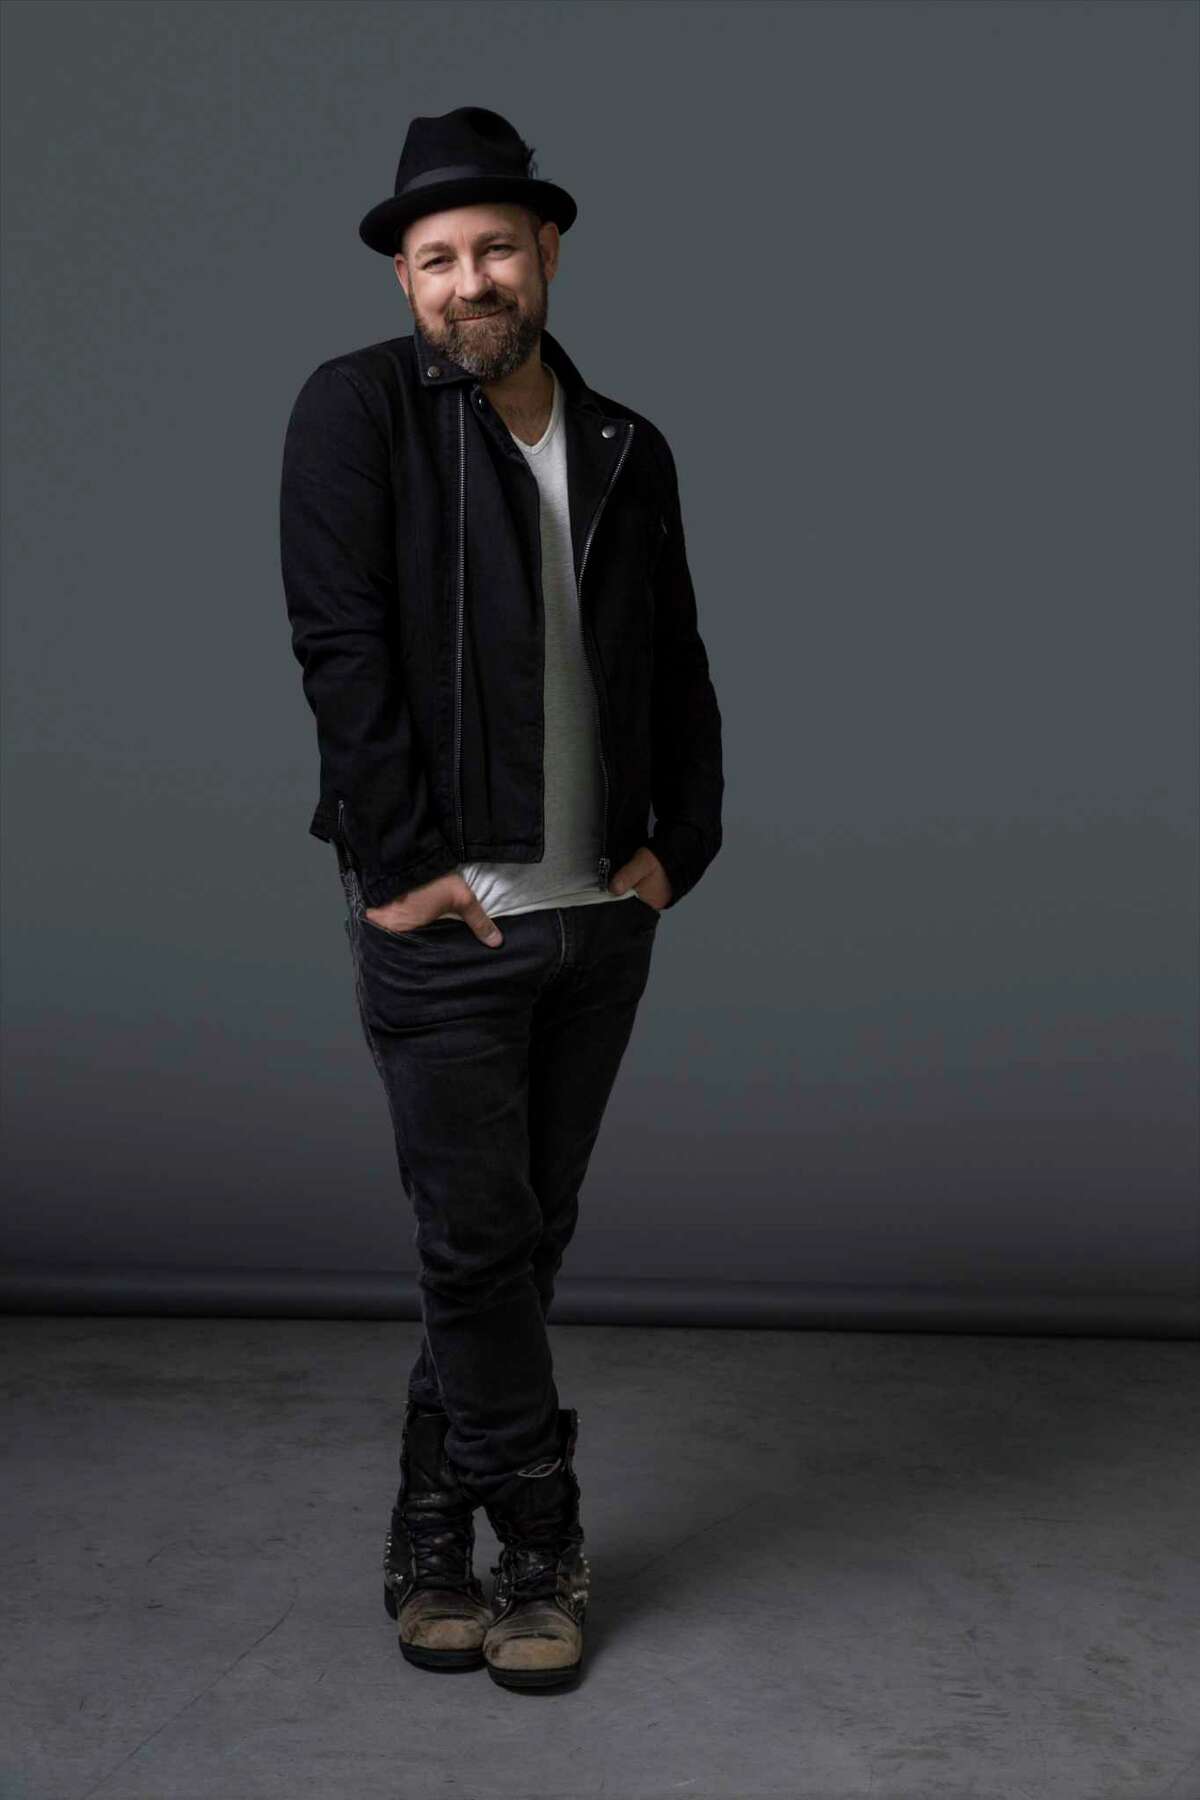 Kristian Bush: A Night of Sugarland songs and solo material will be on July 17 at 8 p.m. at the Ridgefield Playhouse, 80 East Ridge Road, Ridgefield. Tickets are $67. For more information, visit ridgefieldplayhouse.org.